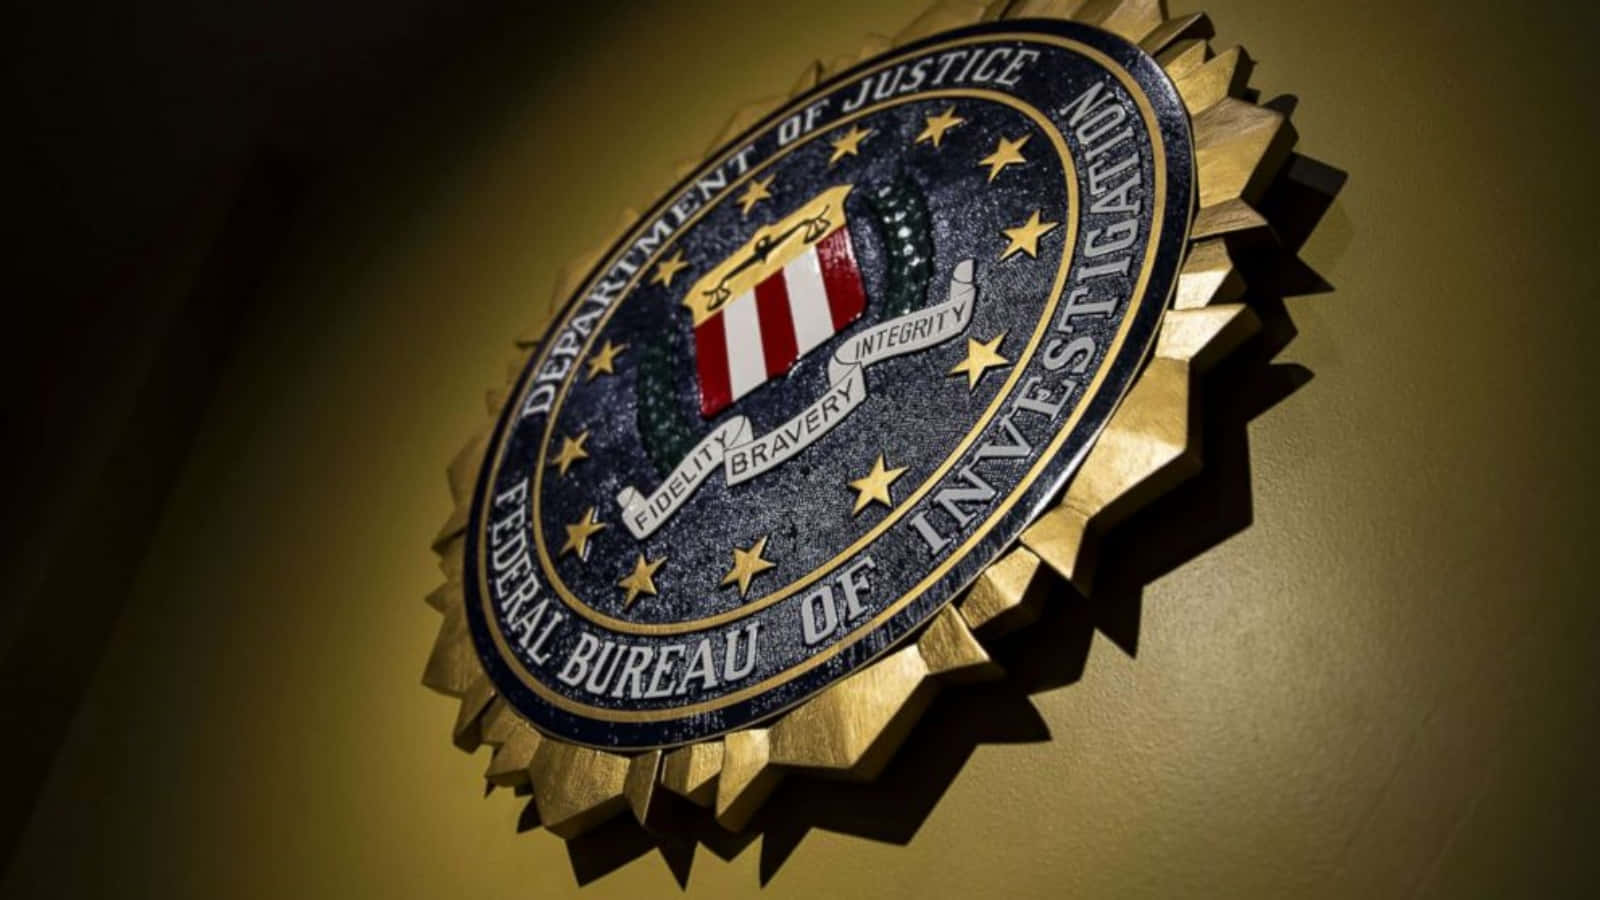 The Fbi Seal Is Seen On The Wall